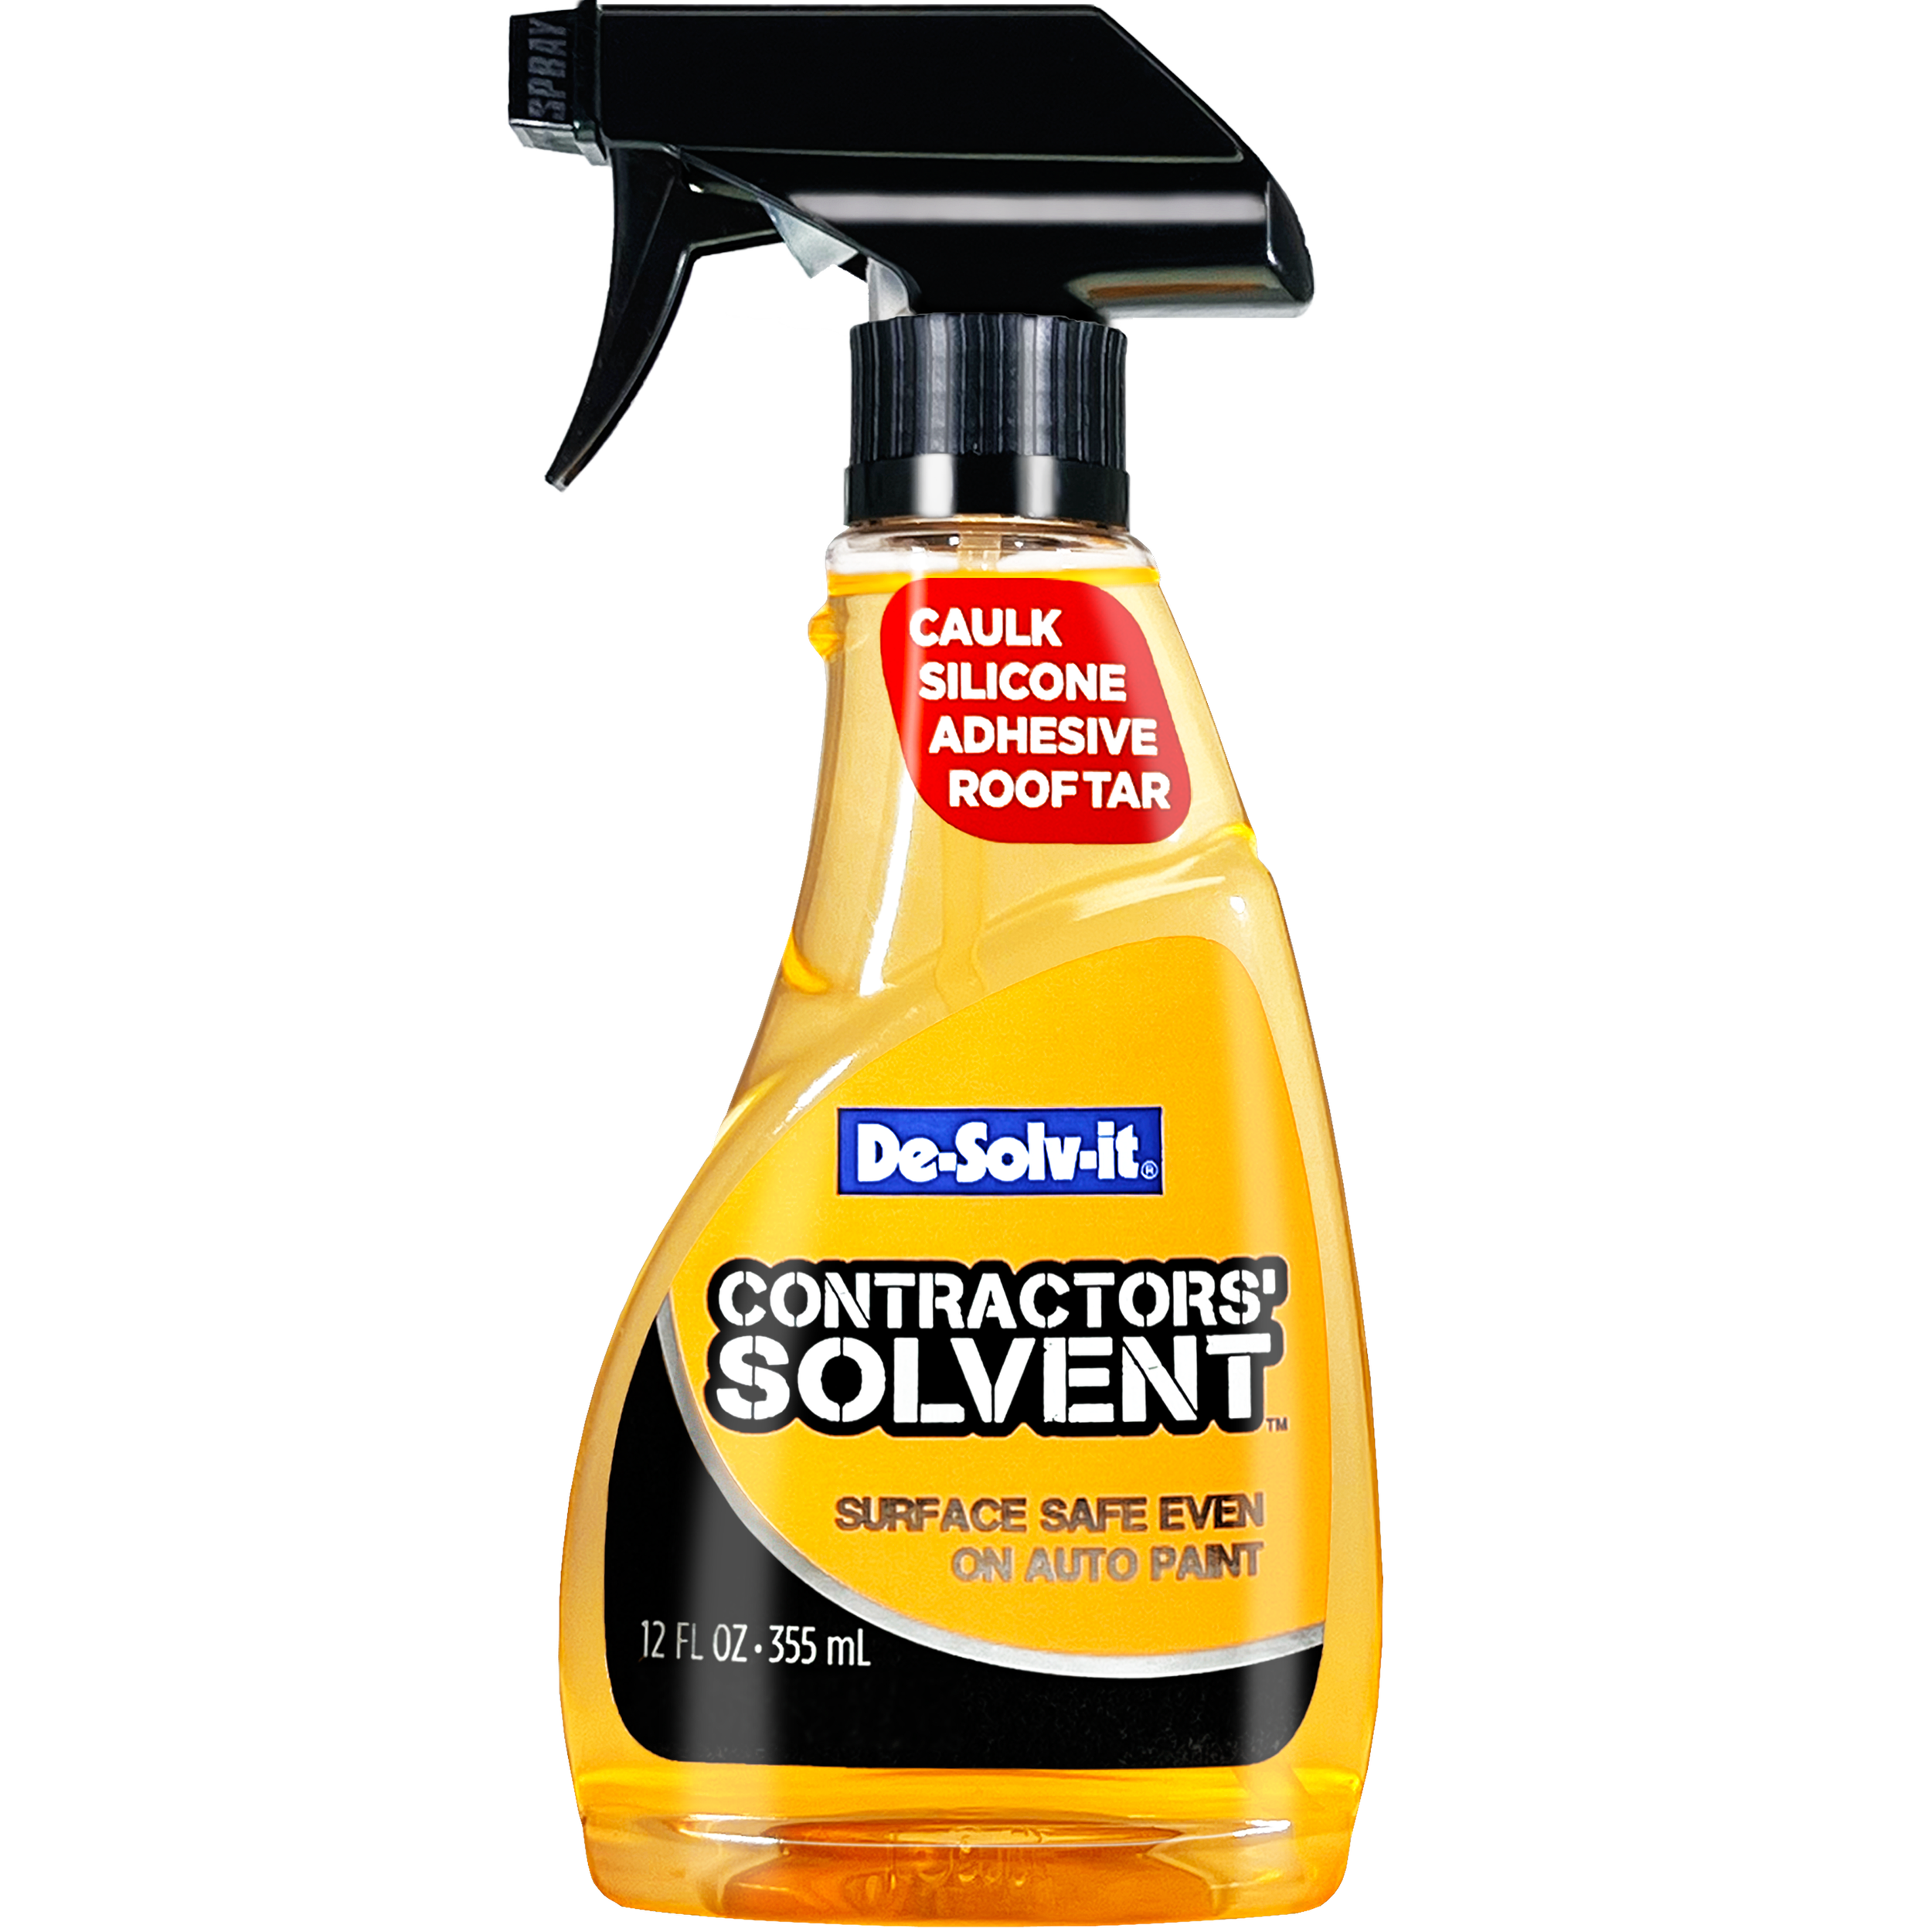 De-Solv-it PRO Contractors Solvent removes silicone, caulk, floor adhesive,  roofing cement and more — De-Solv-it®: Solve it with De-Solv-it®